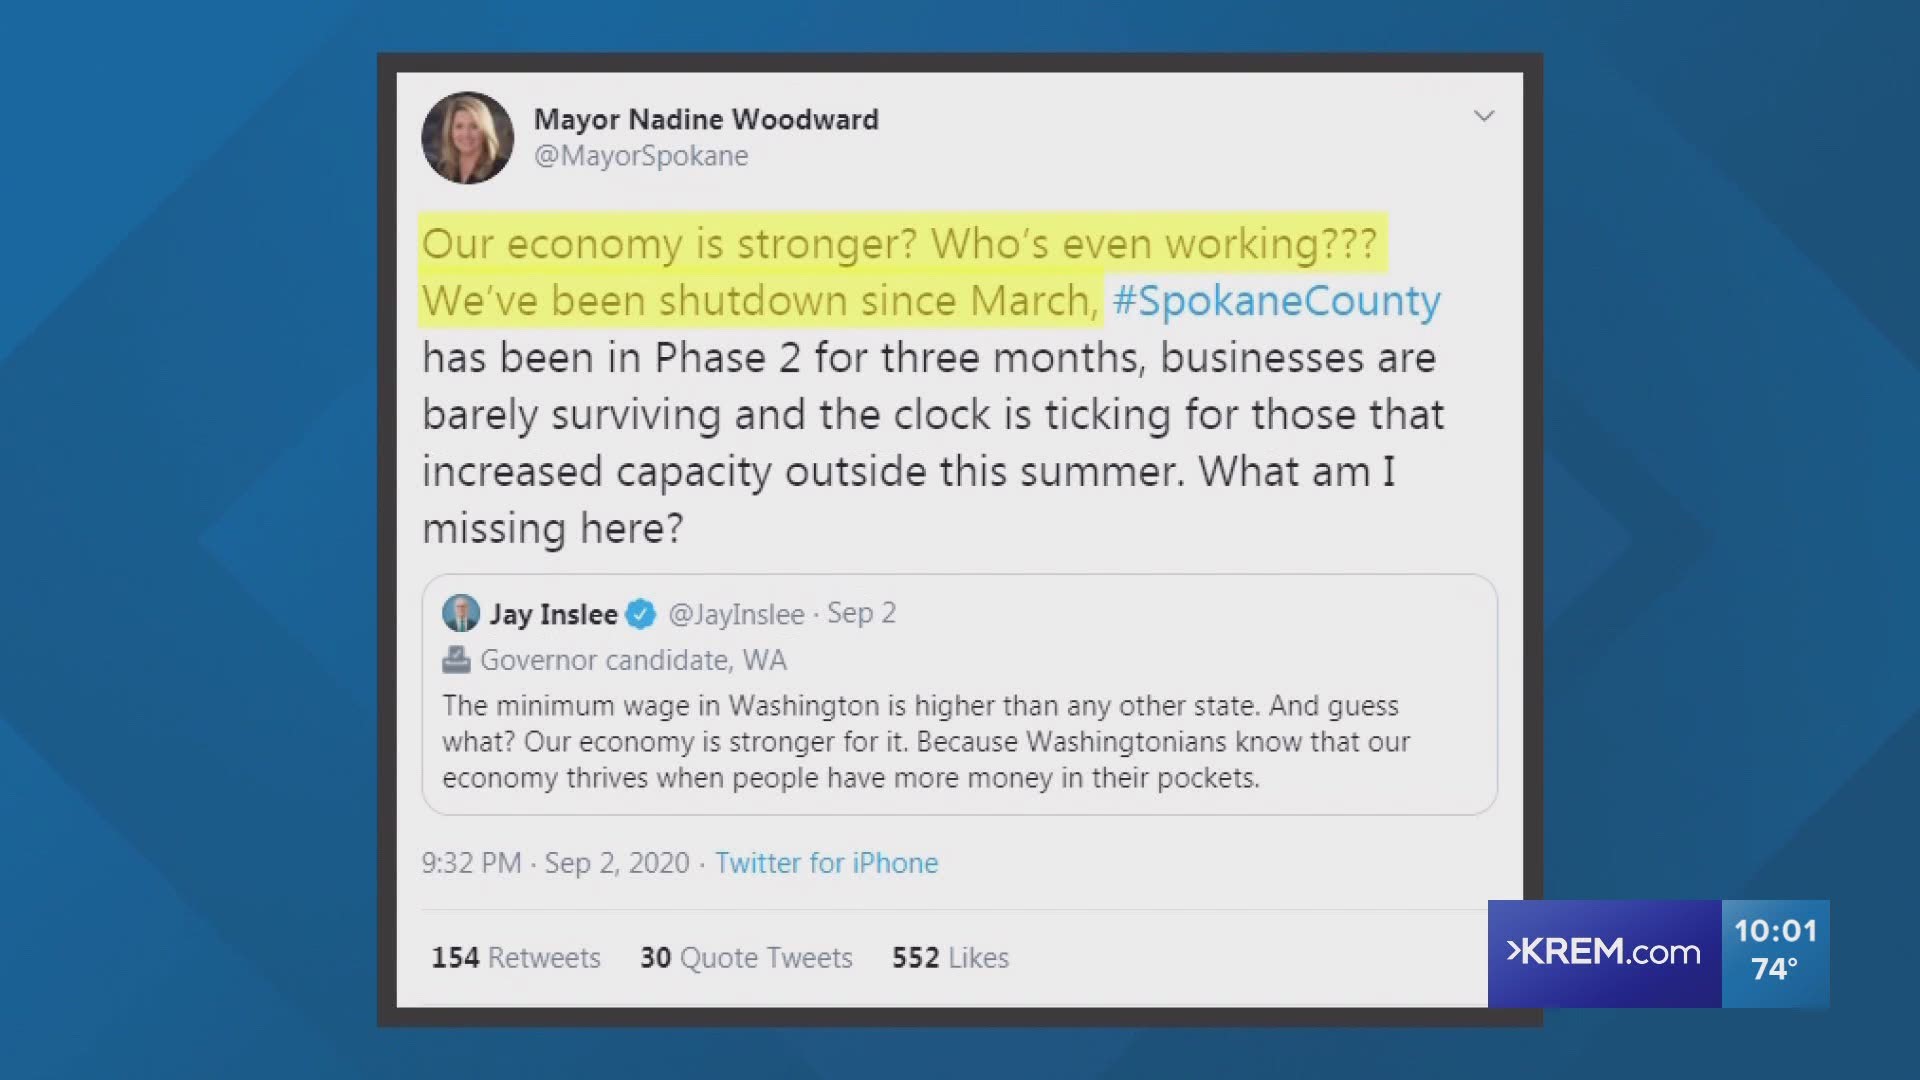 In the tweet, Inslee's campaign mentioned that the minimum wage in Washington is "higher than any other state" and the "economy is stronger for it."